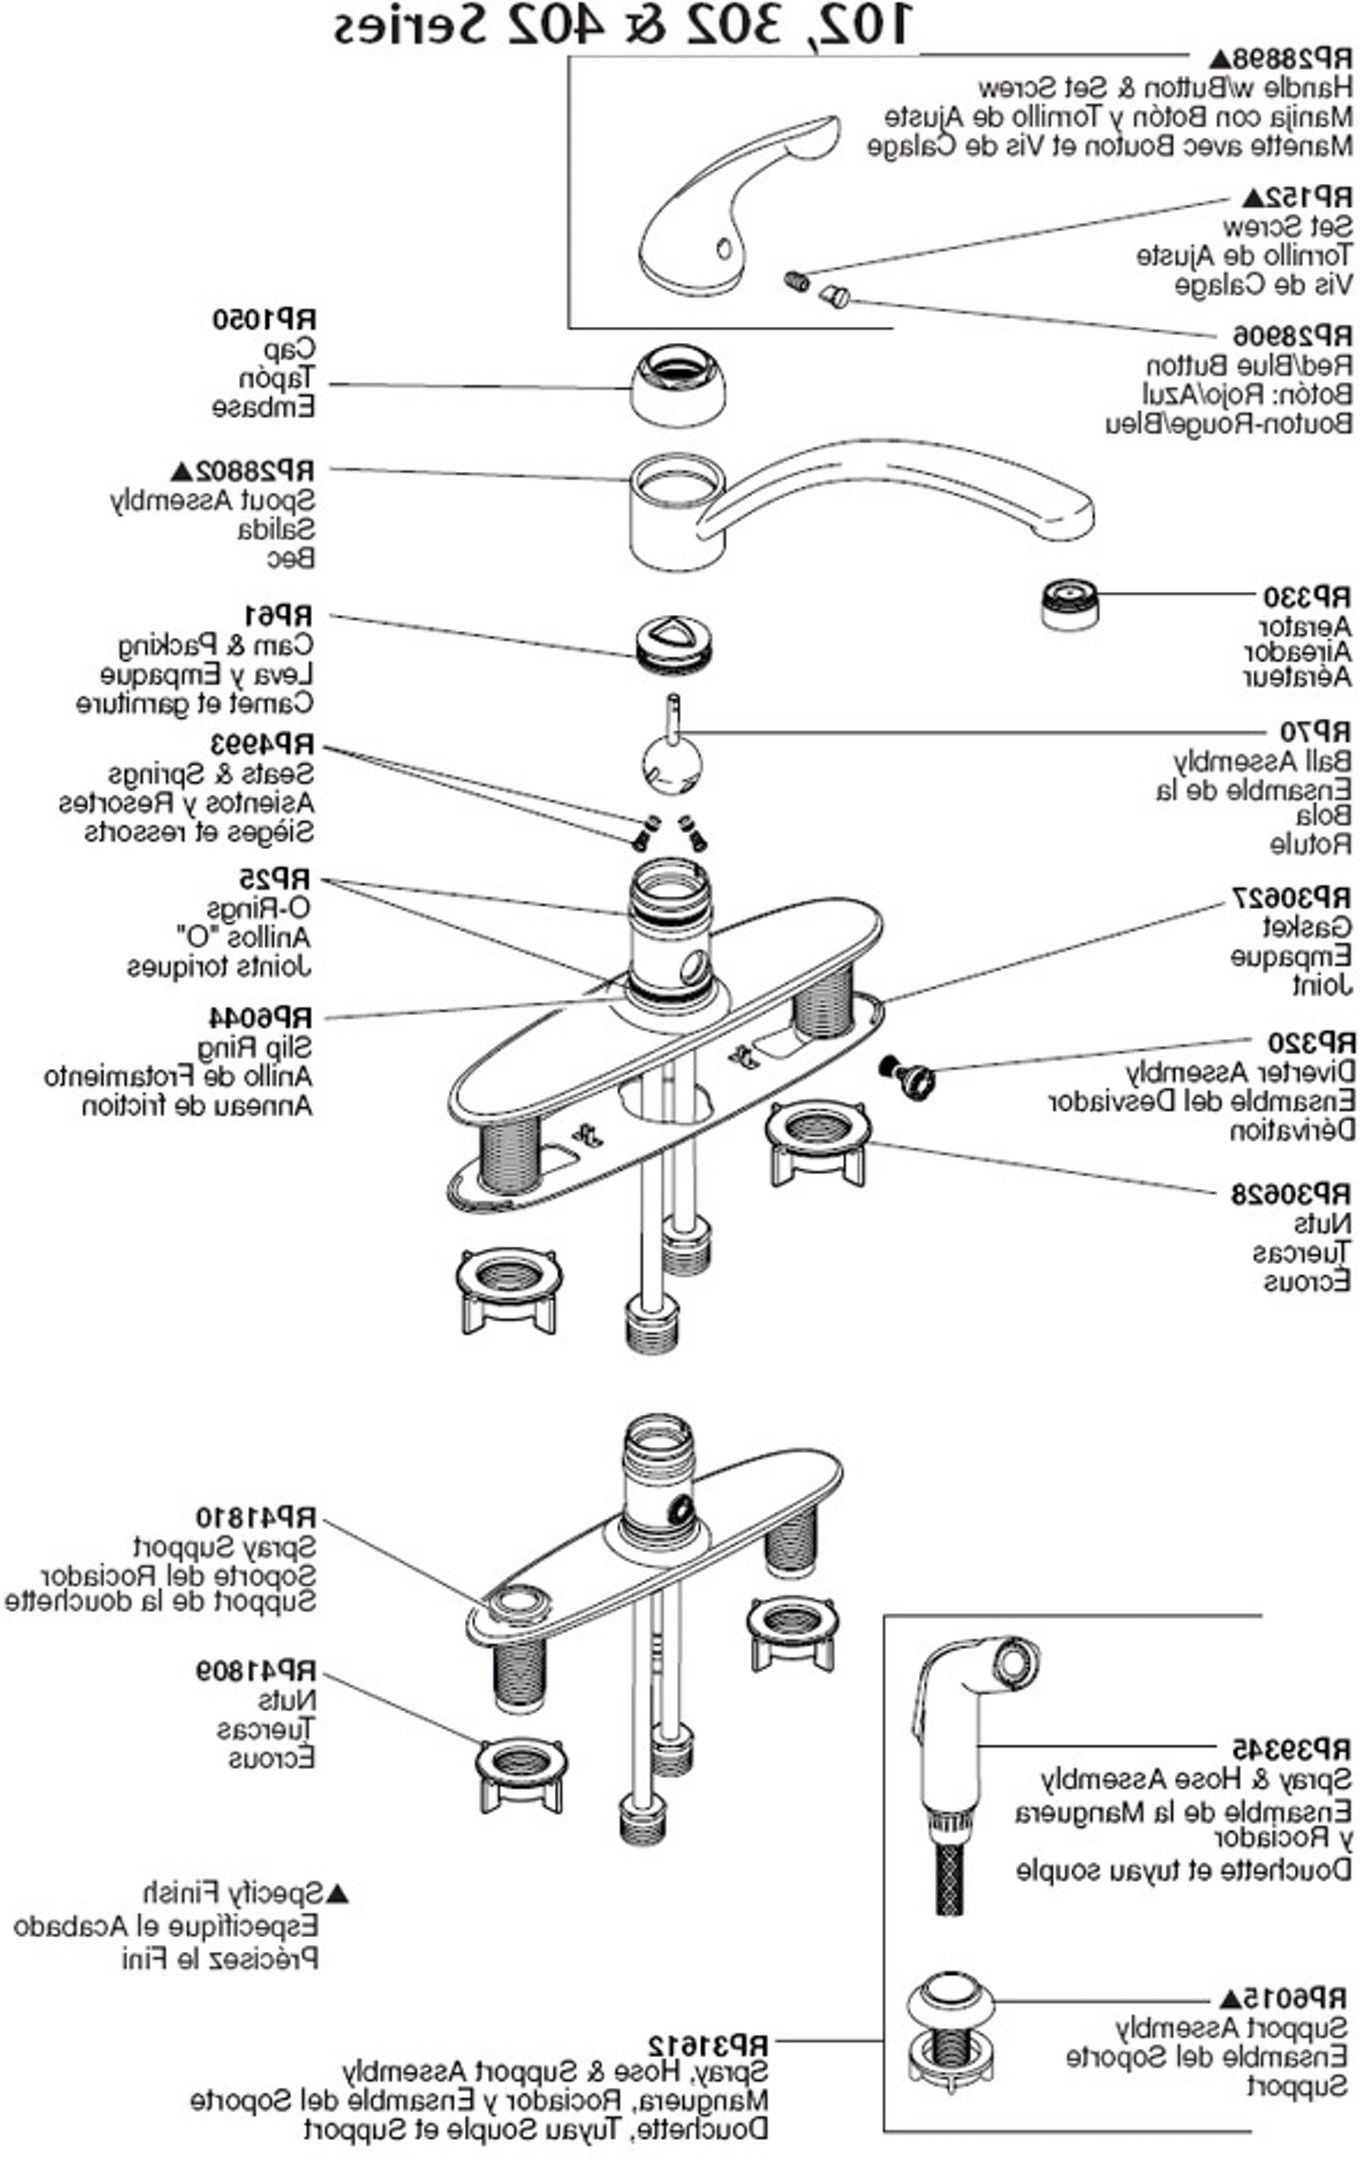 Delta Faucet Repair Parts Diagram Pin by Home Furniture On Home Furniture E Pinterest Of Delta Faucet Repair Parts Diagram